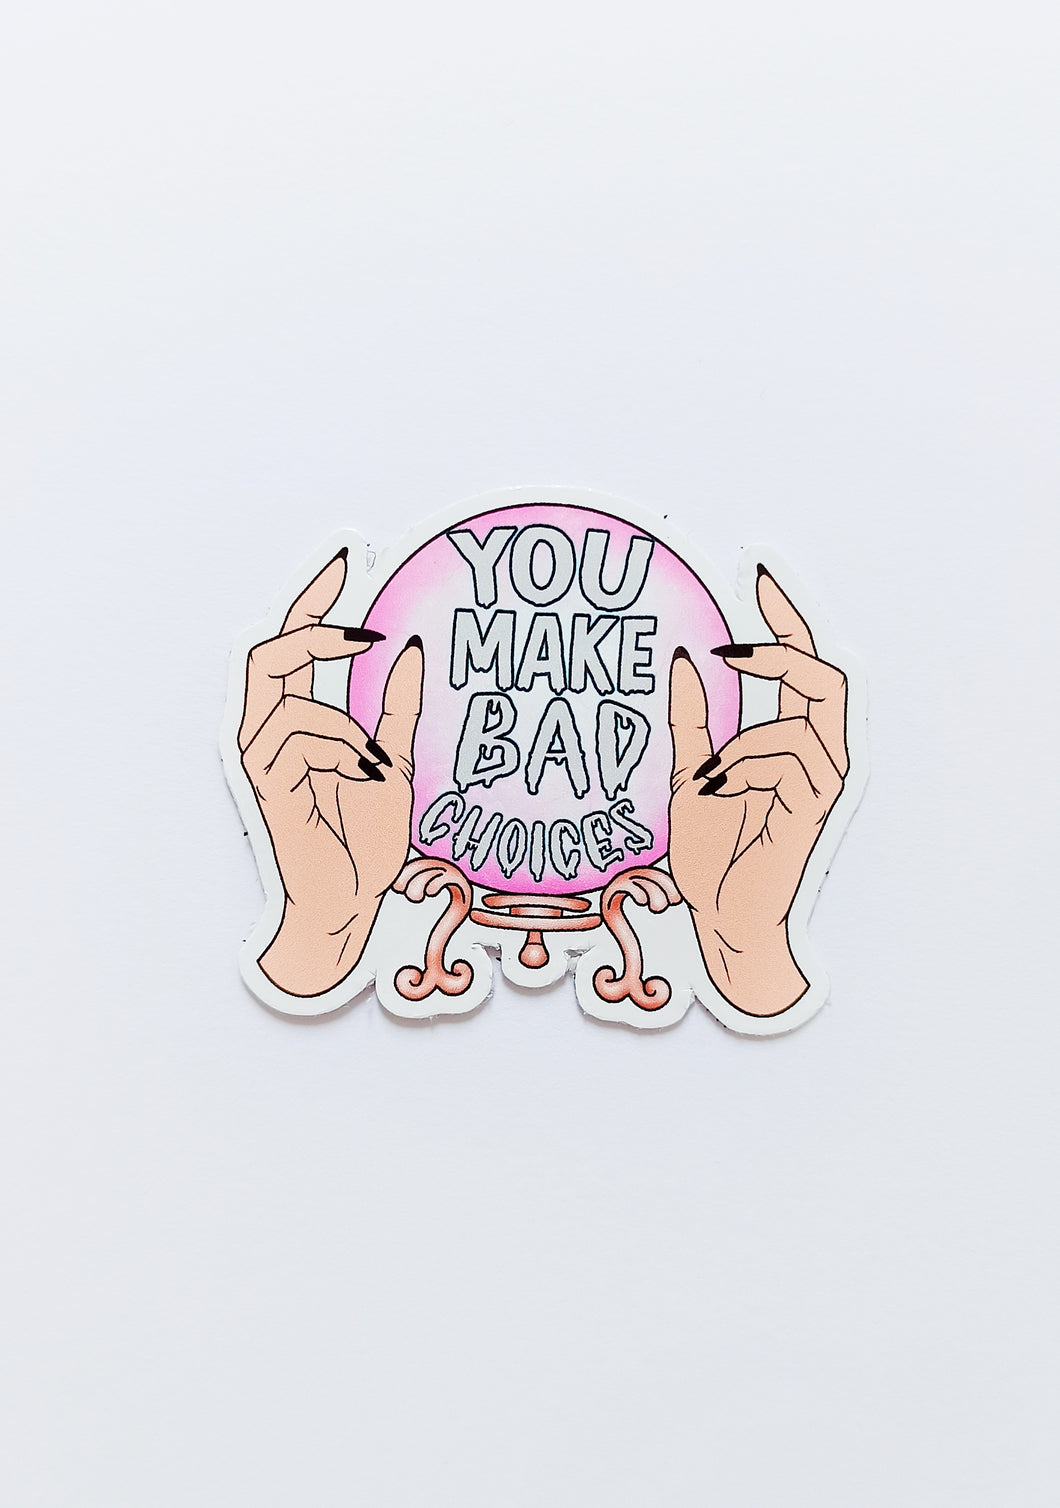 GretelCreates' You Make Bad Choices Pink Crystal Ball Decorative Sticker.